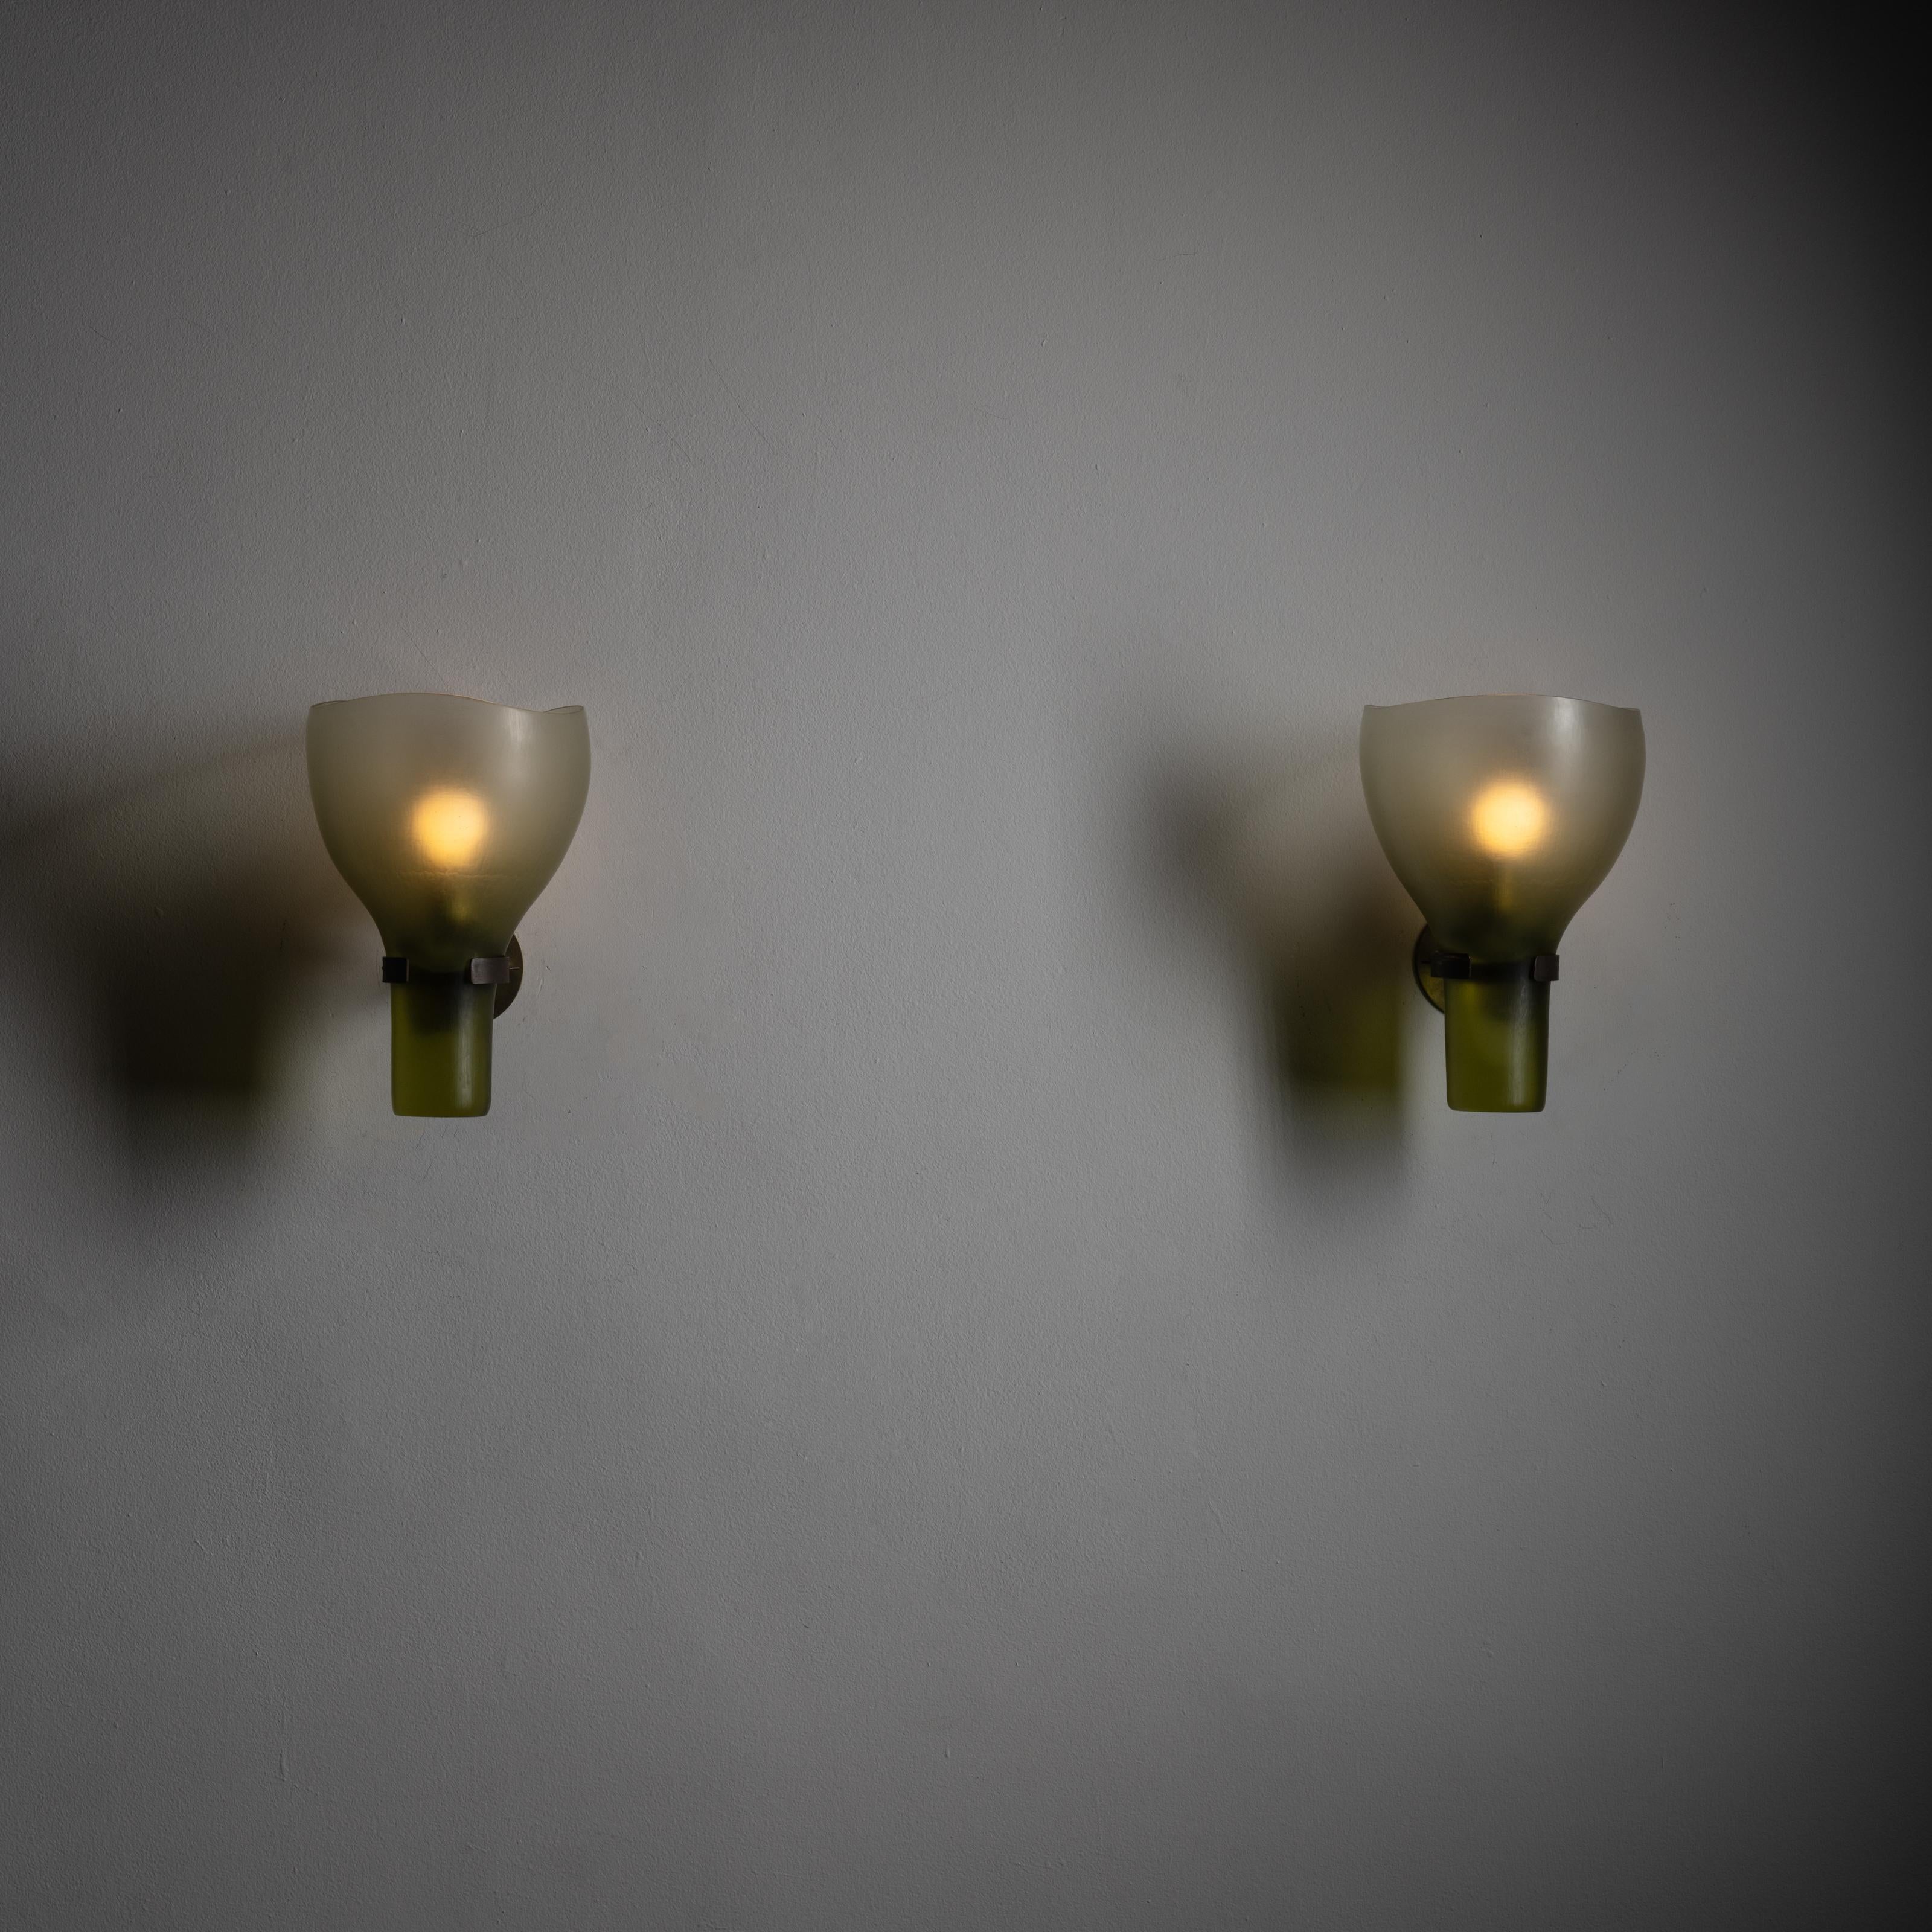 Pair of sconces by Tobia Scarpa for Venini. Rare battuto glass chalice shaped wall sconce in a soft sage color. We recommend a 40w maximum E12 bulb. Wired for US Standards. Bulbs not included.

Literature: Franco Deboni, Venini Glass: Its History,